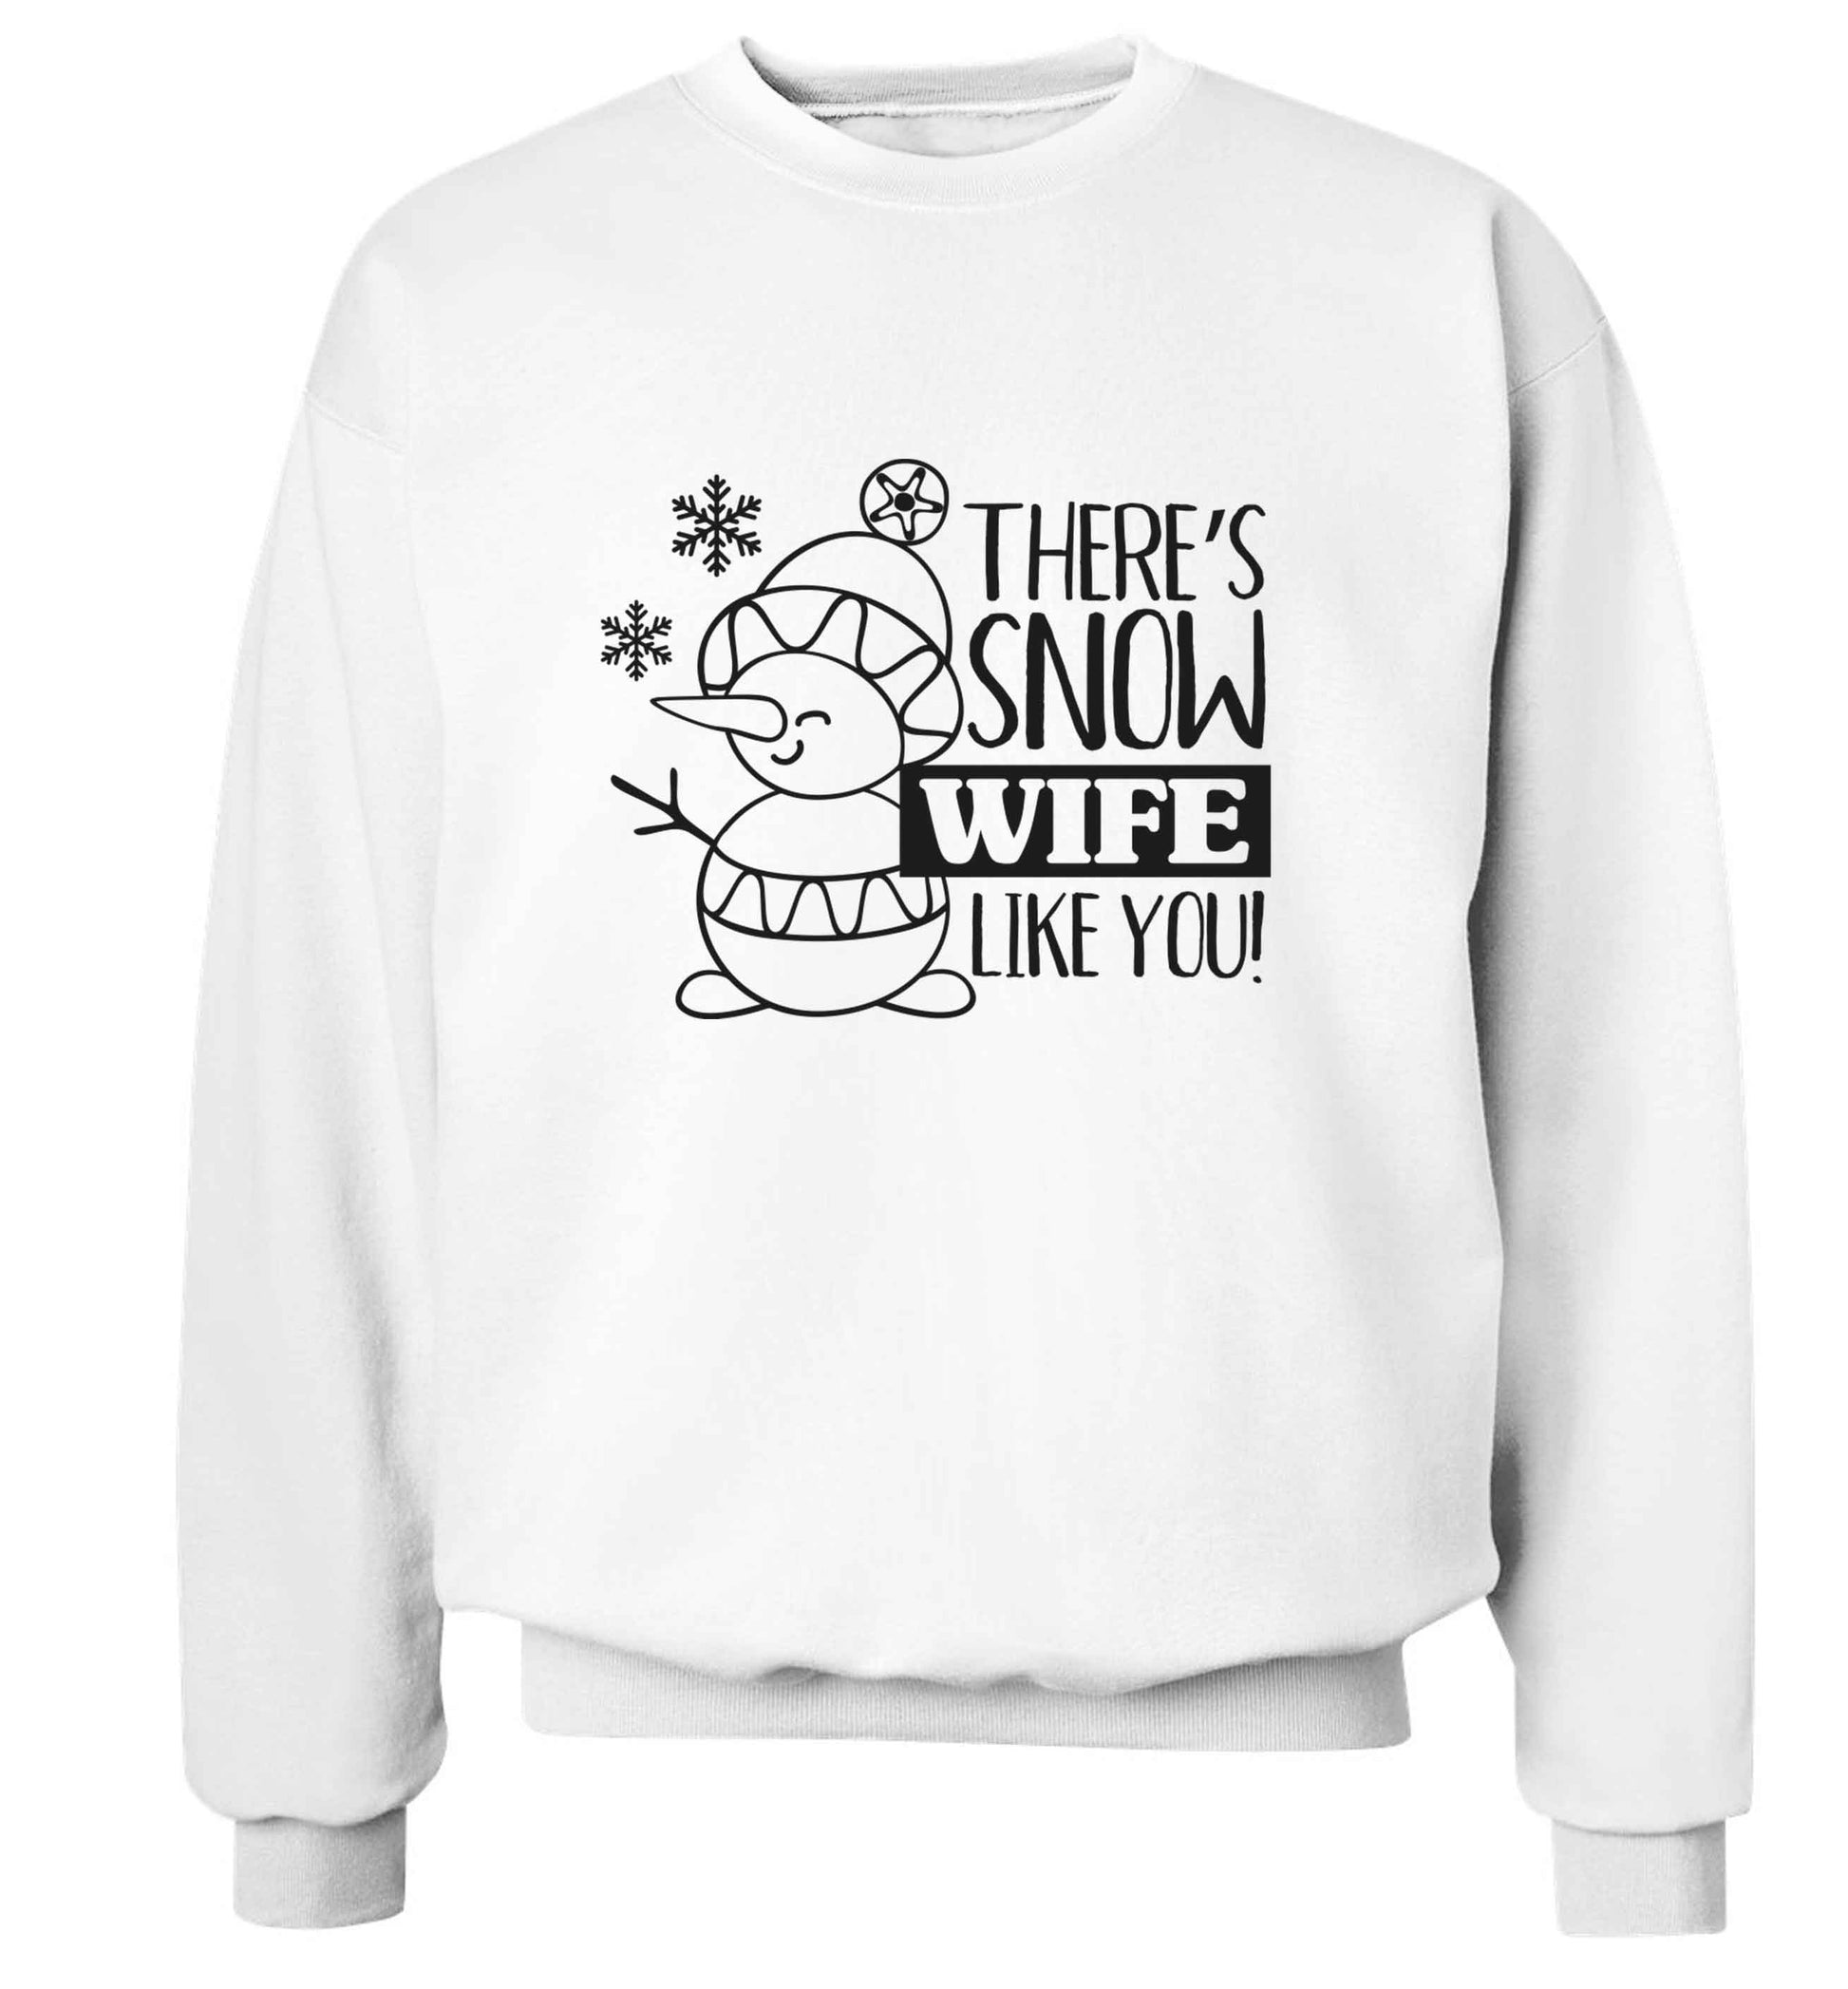 There's snow wife like you adult's unisex white sweater 2XL